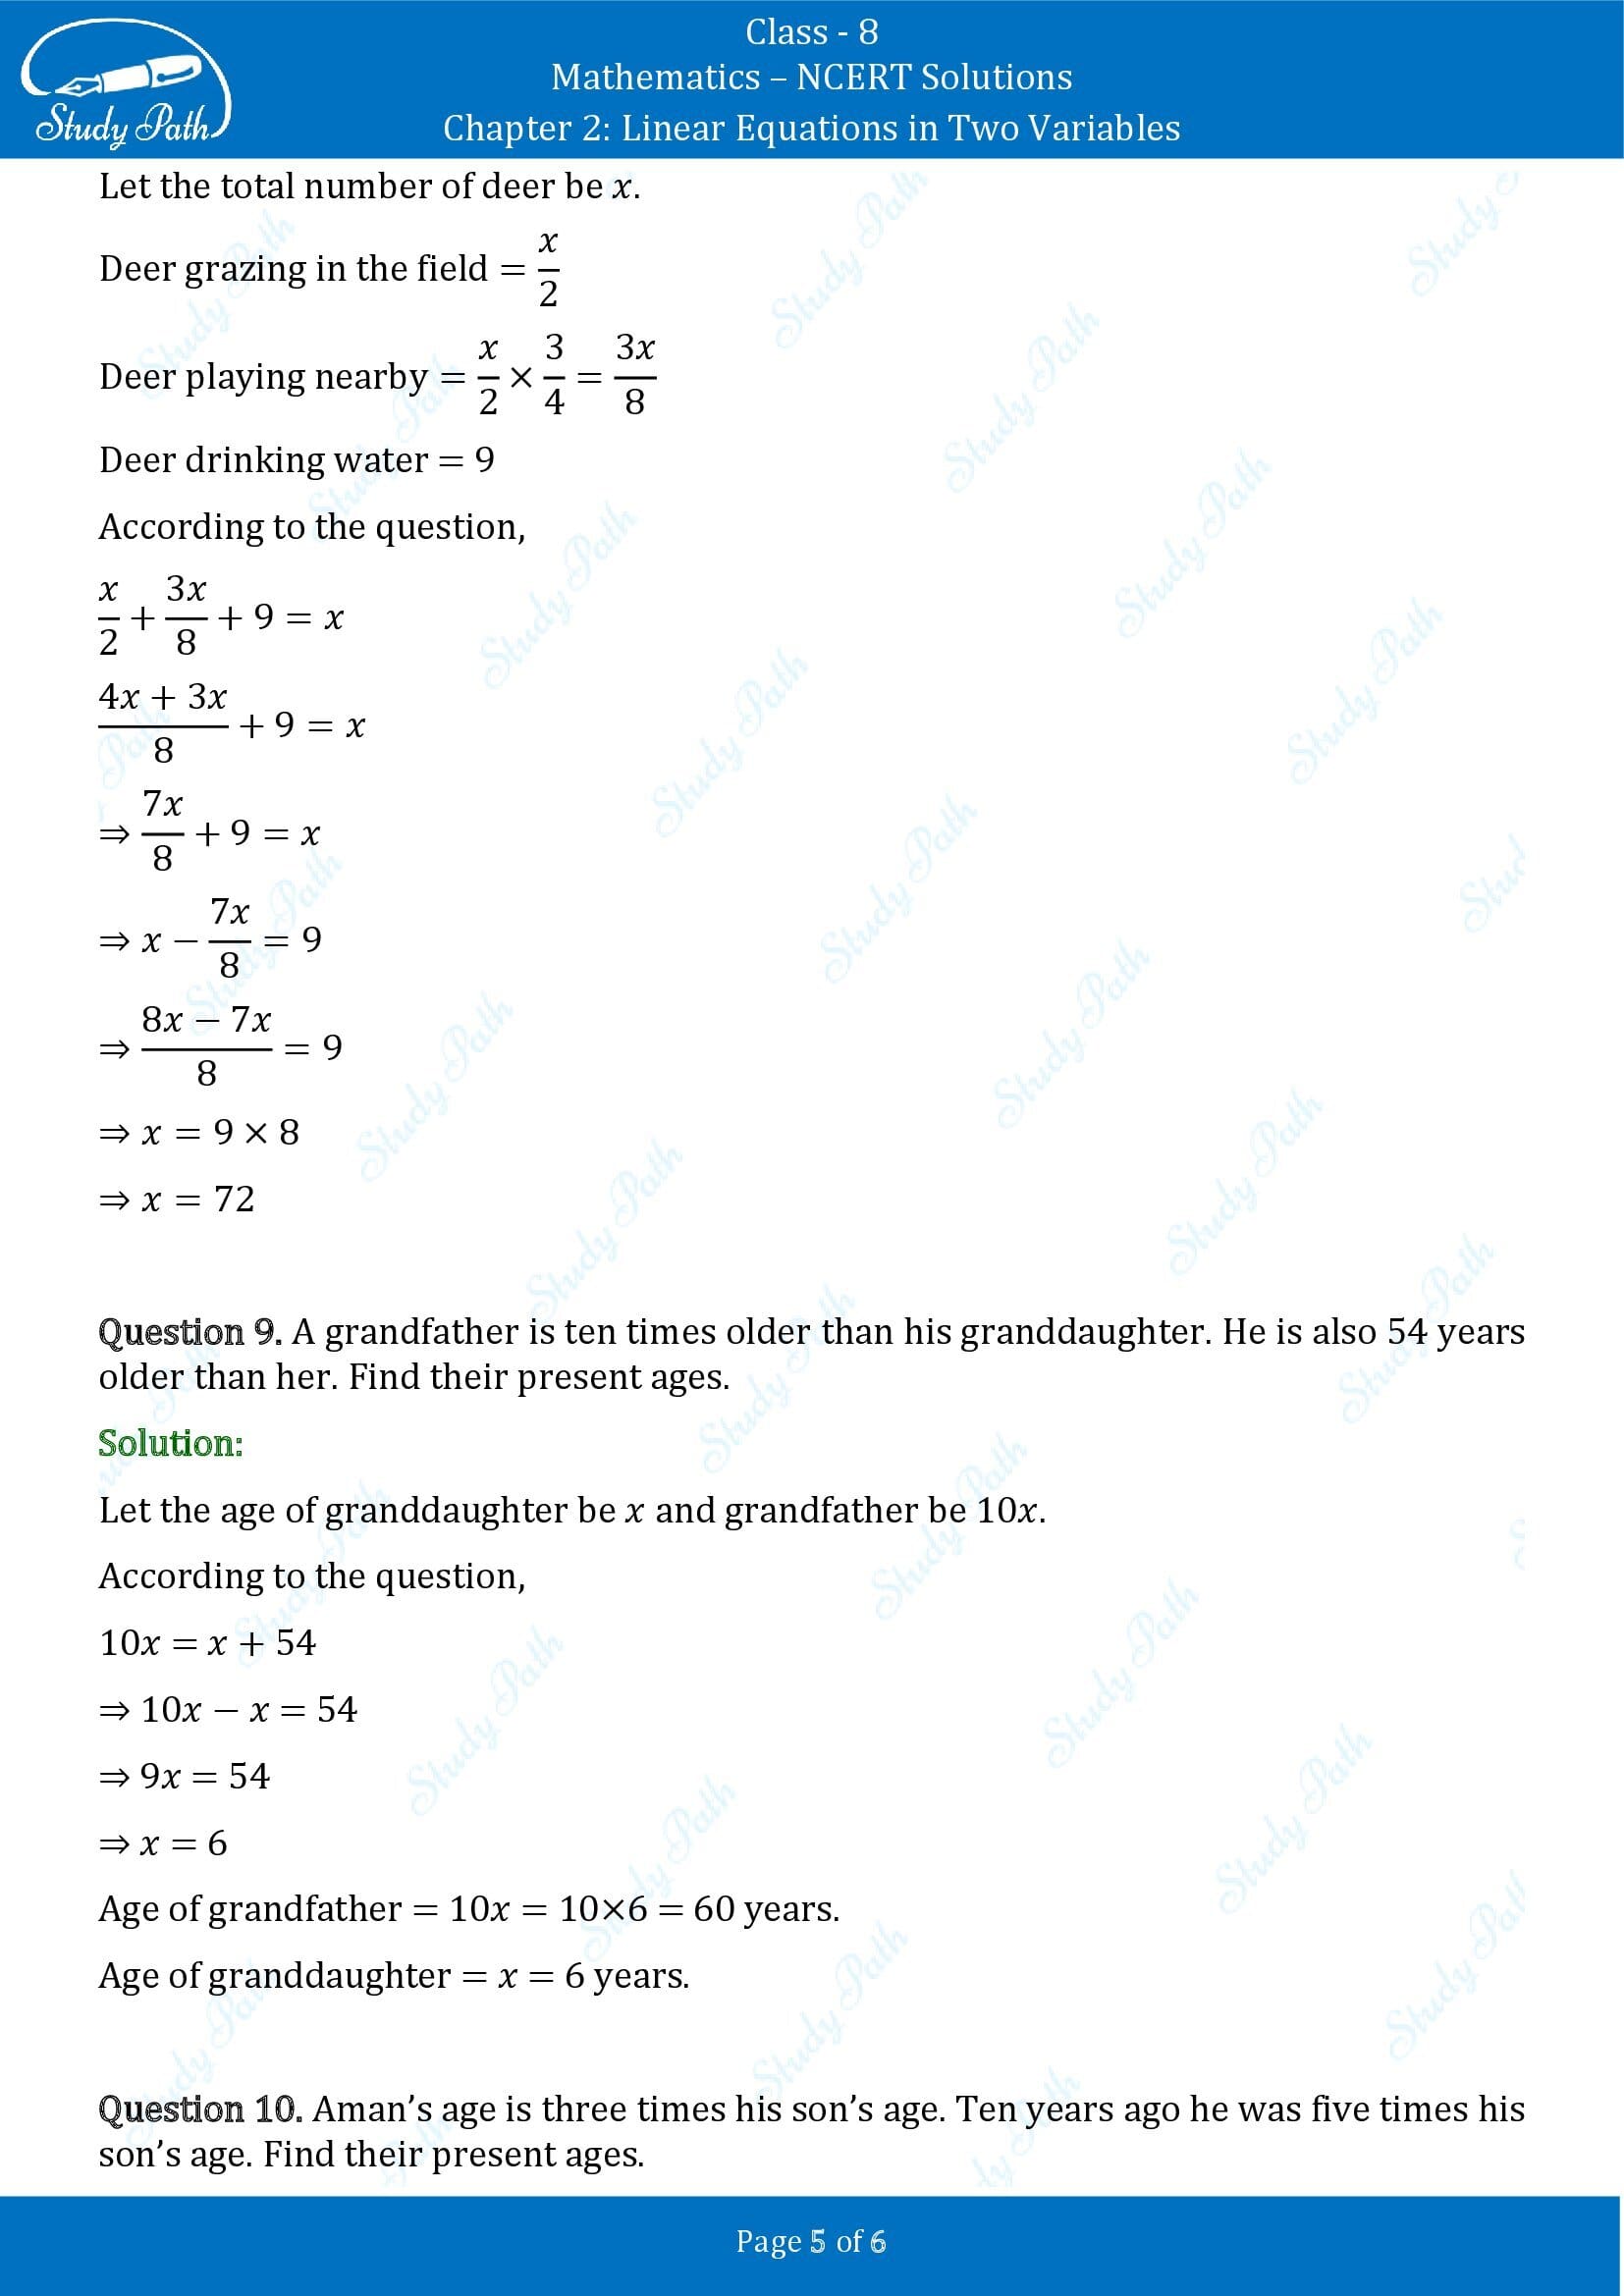 NCERT Solutions for Class 8 Maths Chapter 2 Linear Equations in Two Variables Exercise 2.4 00005